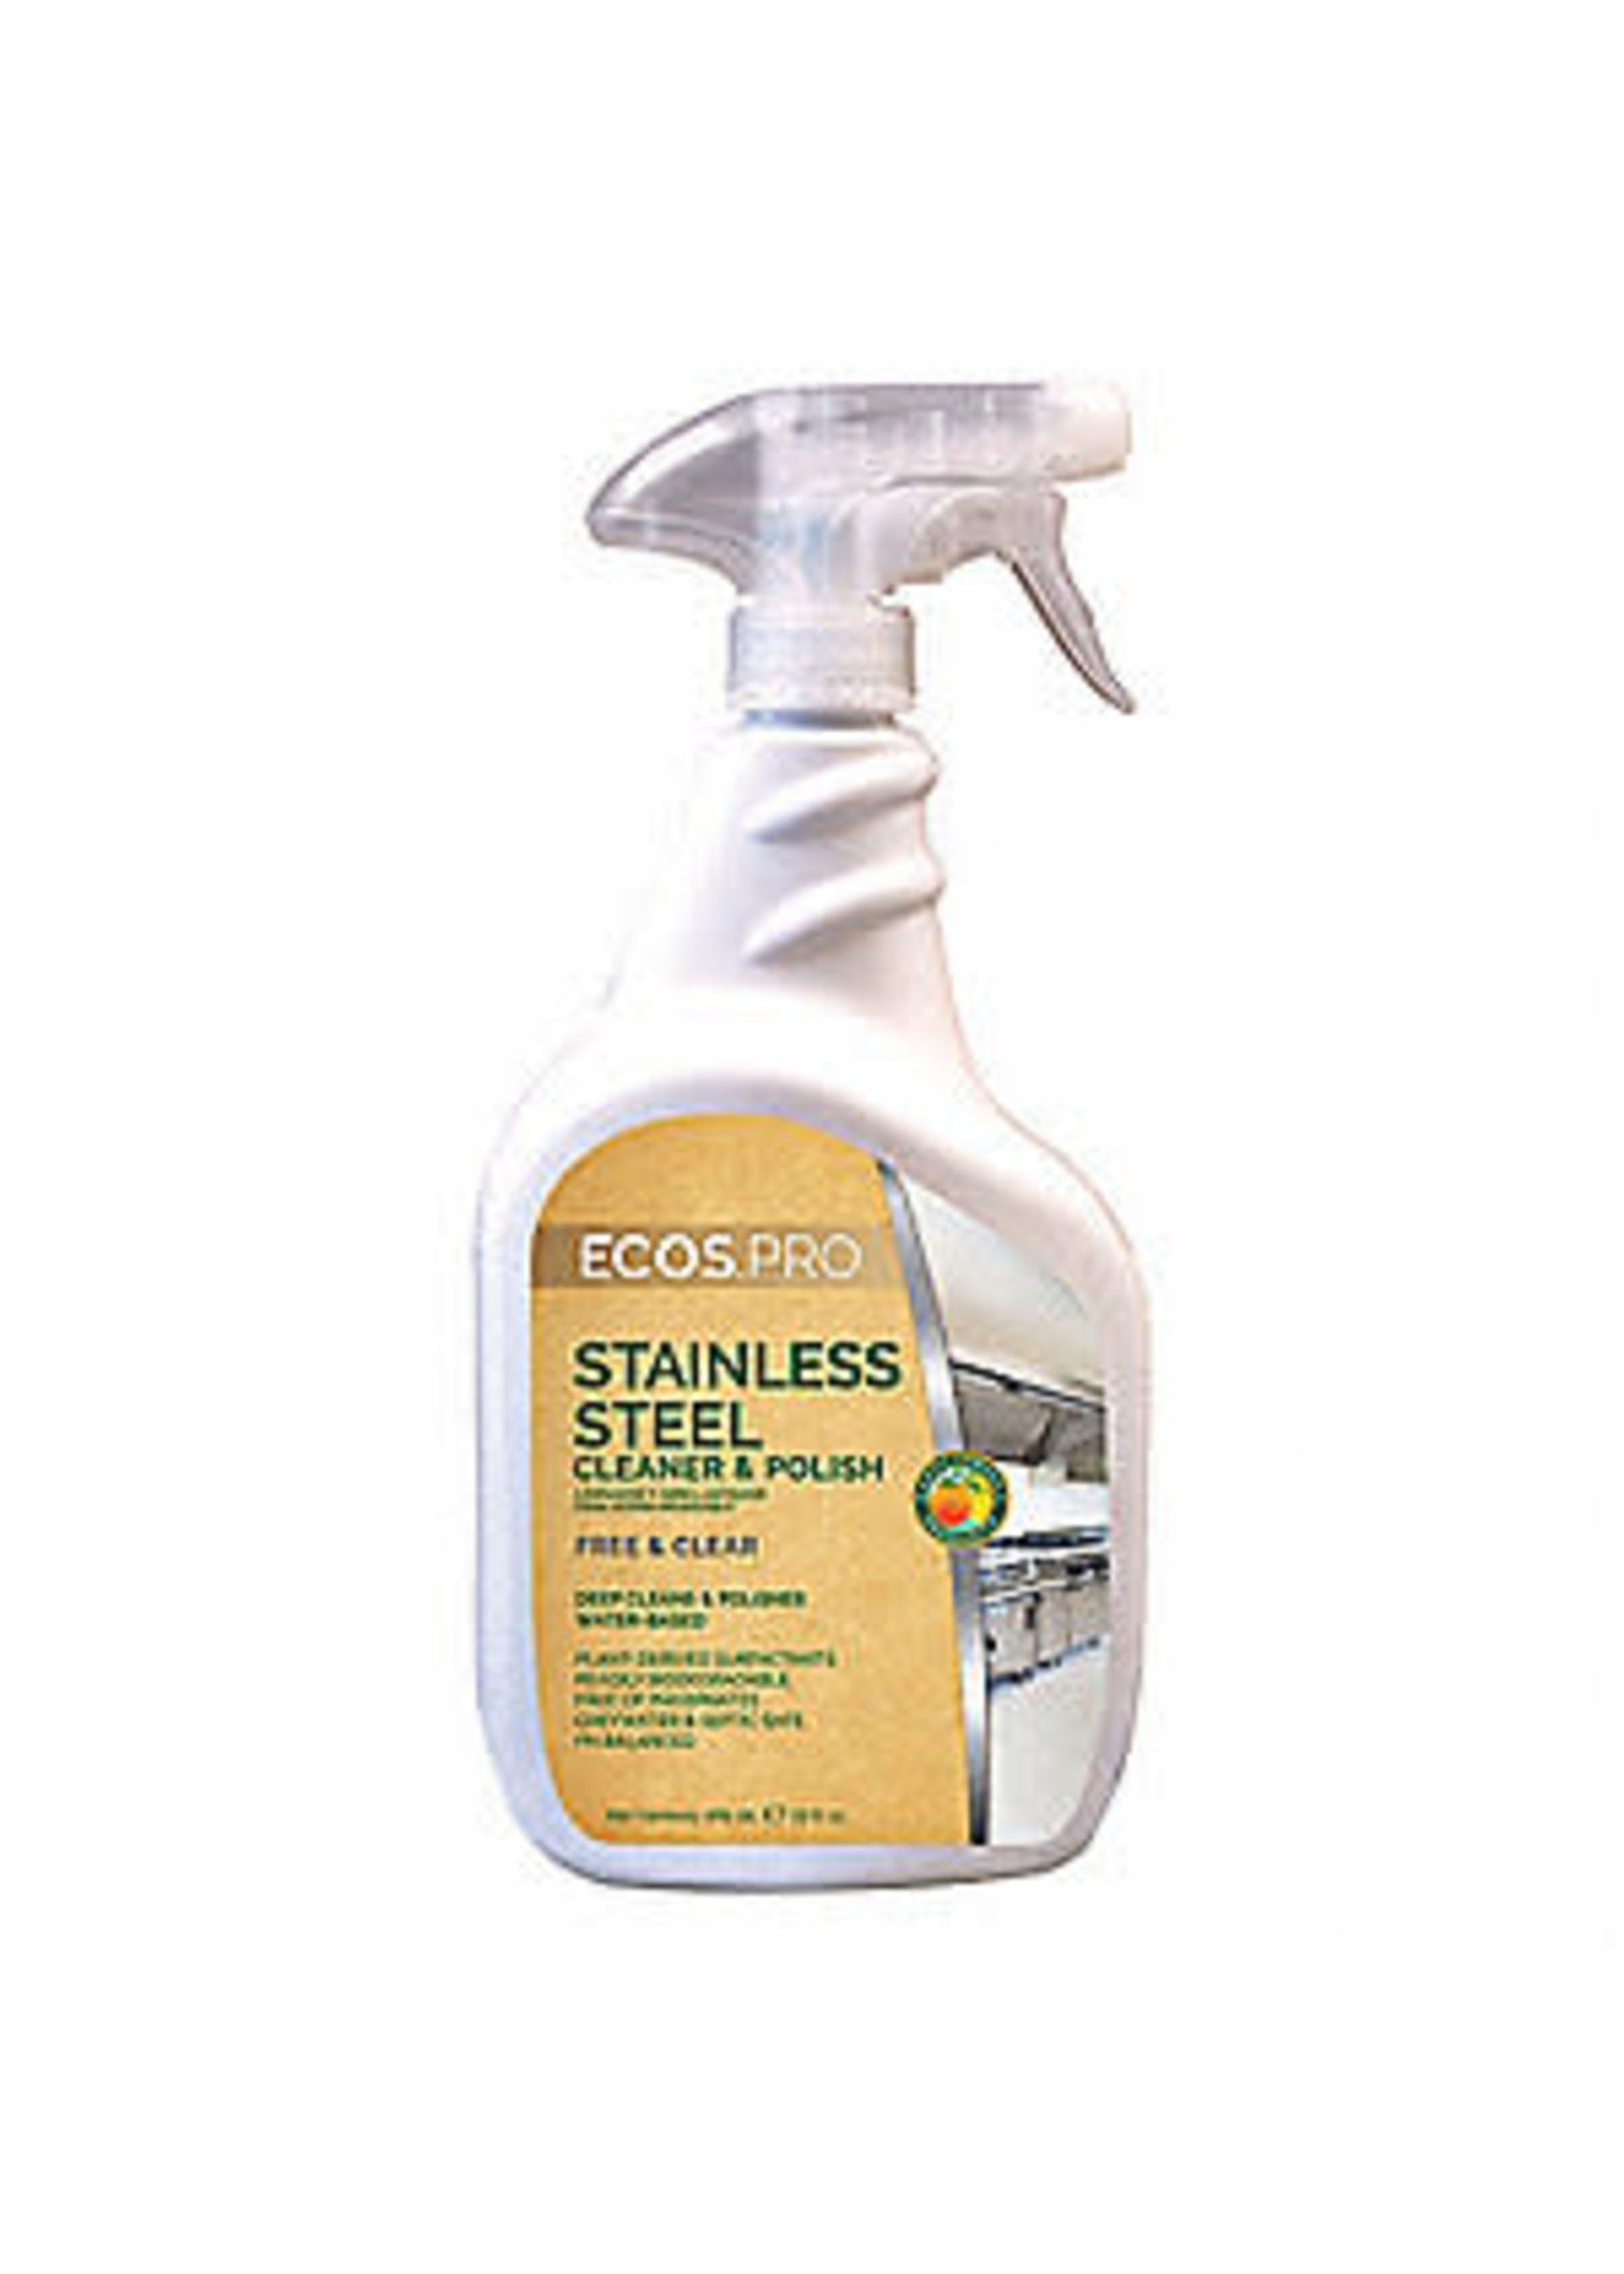 Cleaner, Stainless Steel